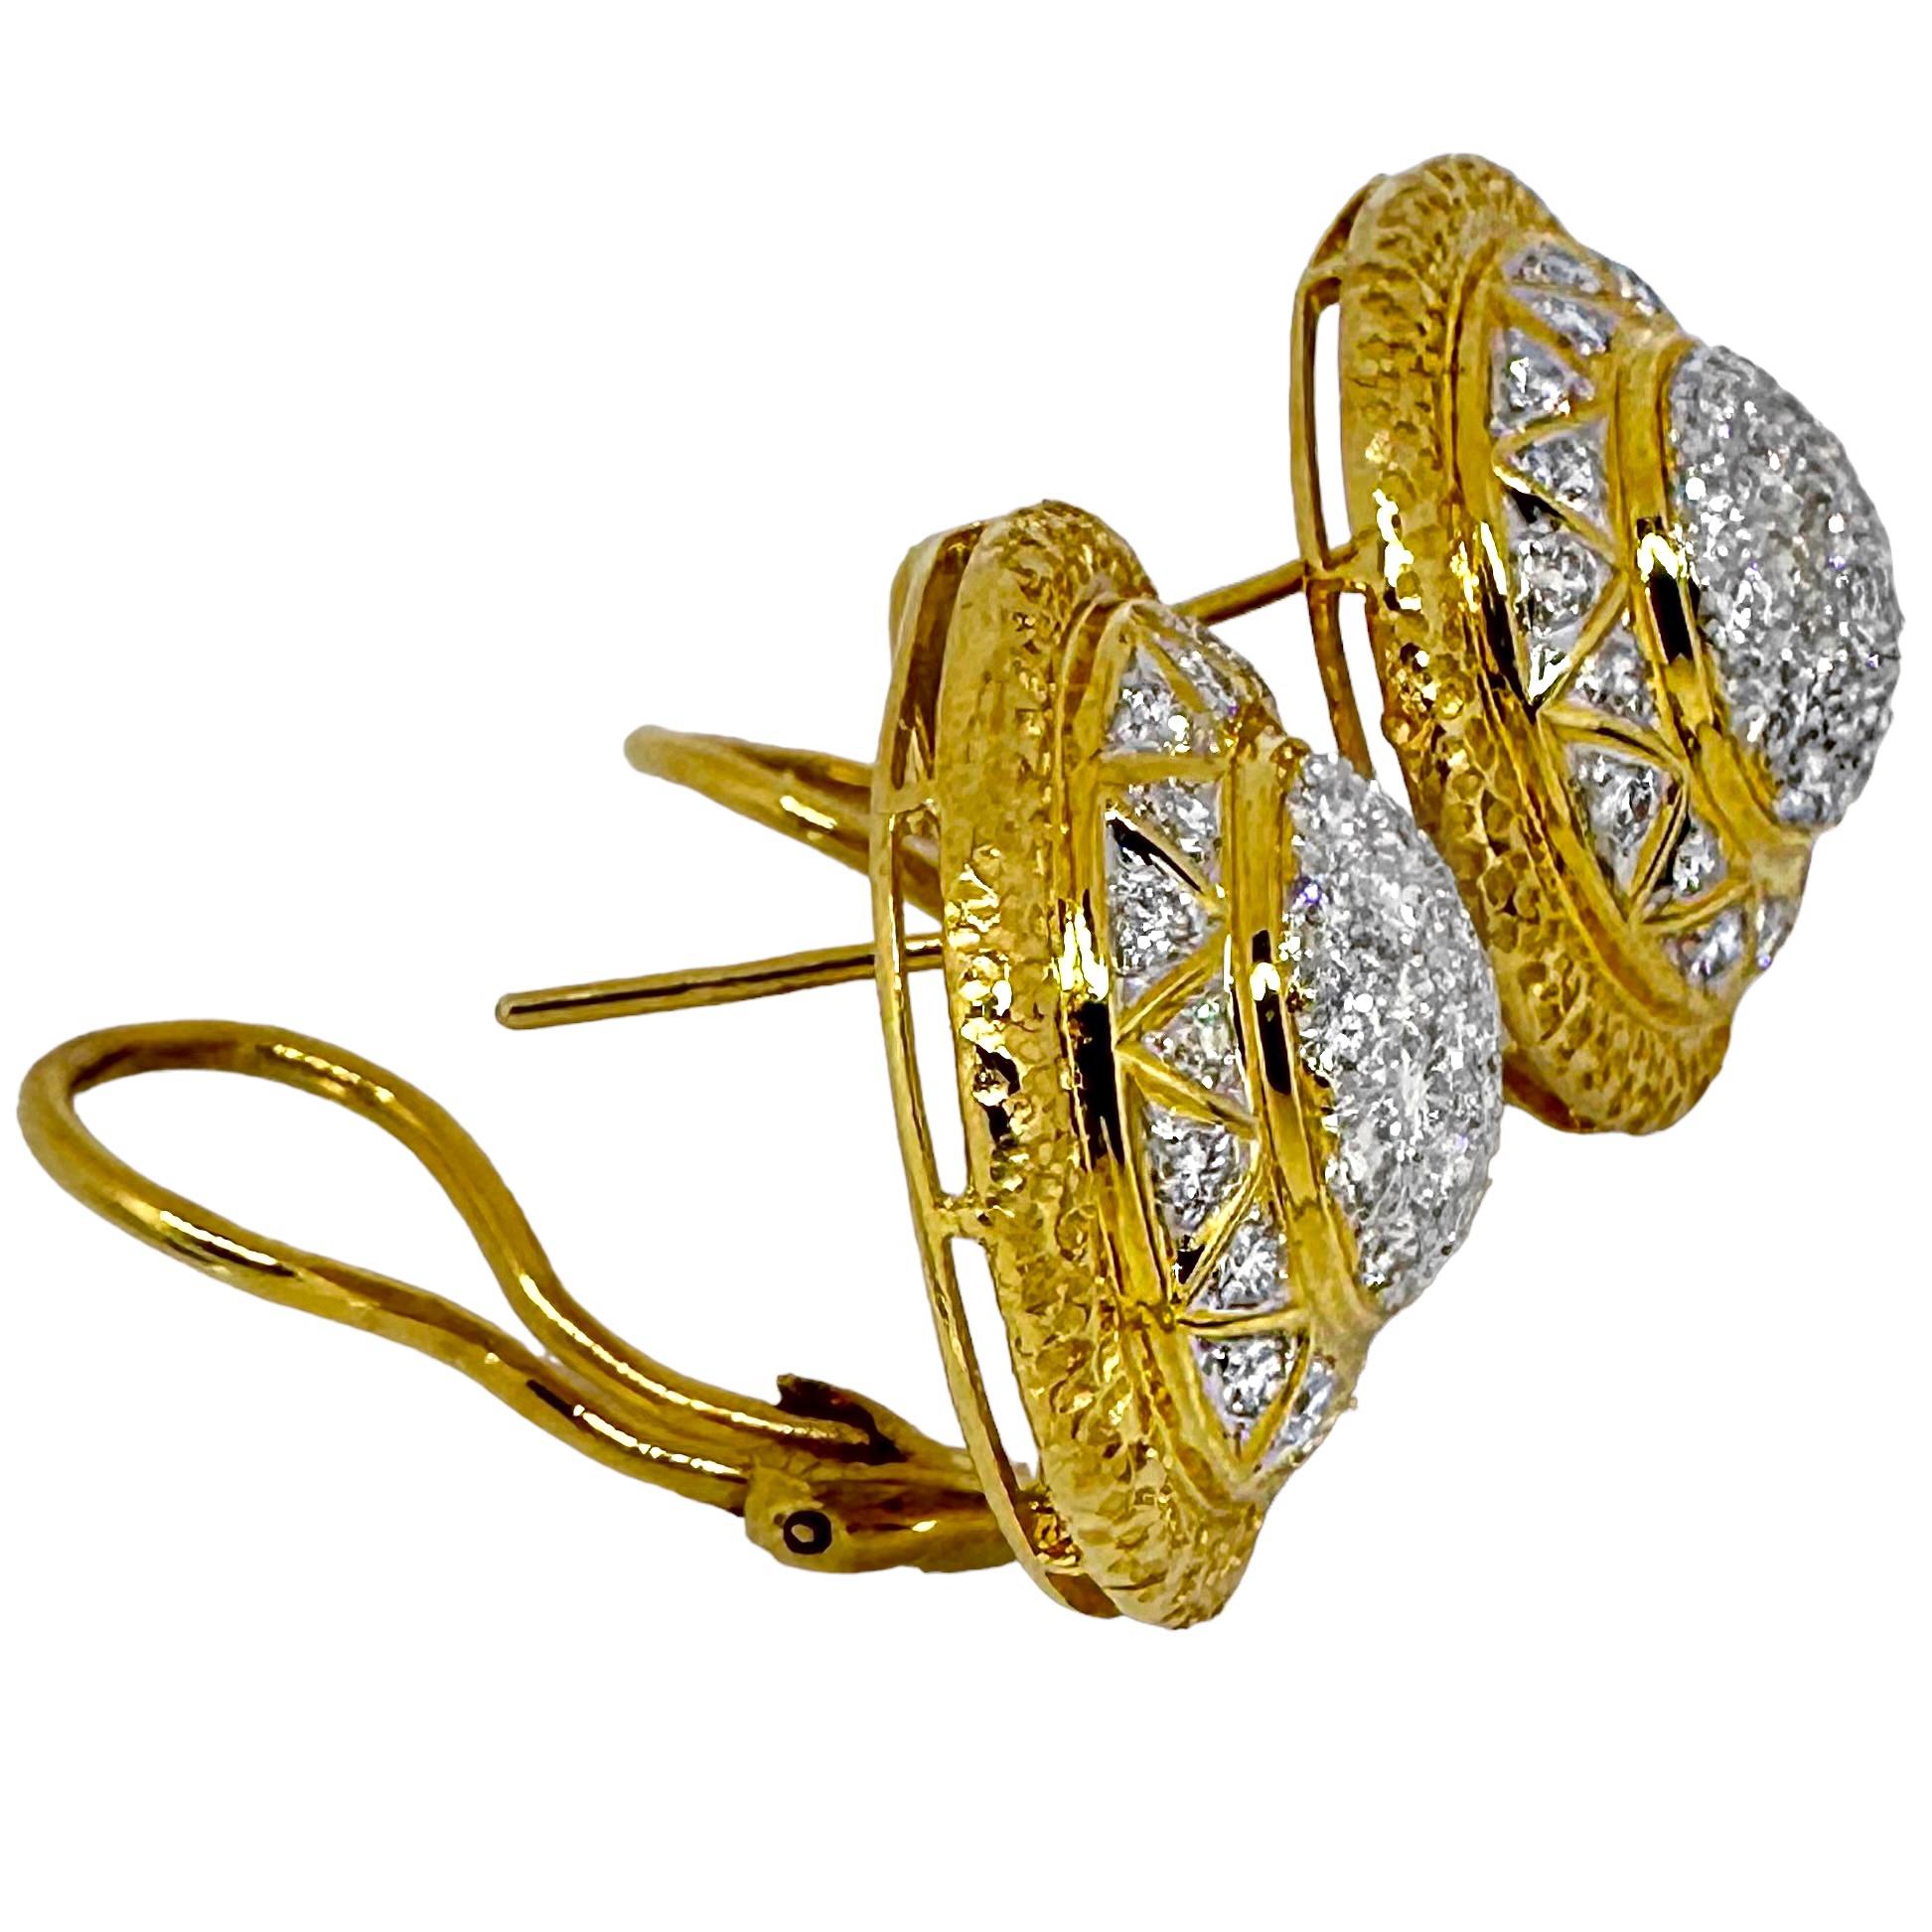 Women's 18K Stylish & Tailored Gold & Diamond Encrusted Dome Earrings 7/8 Inch Diameter For Sale